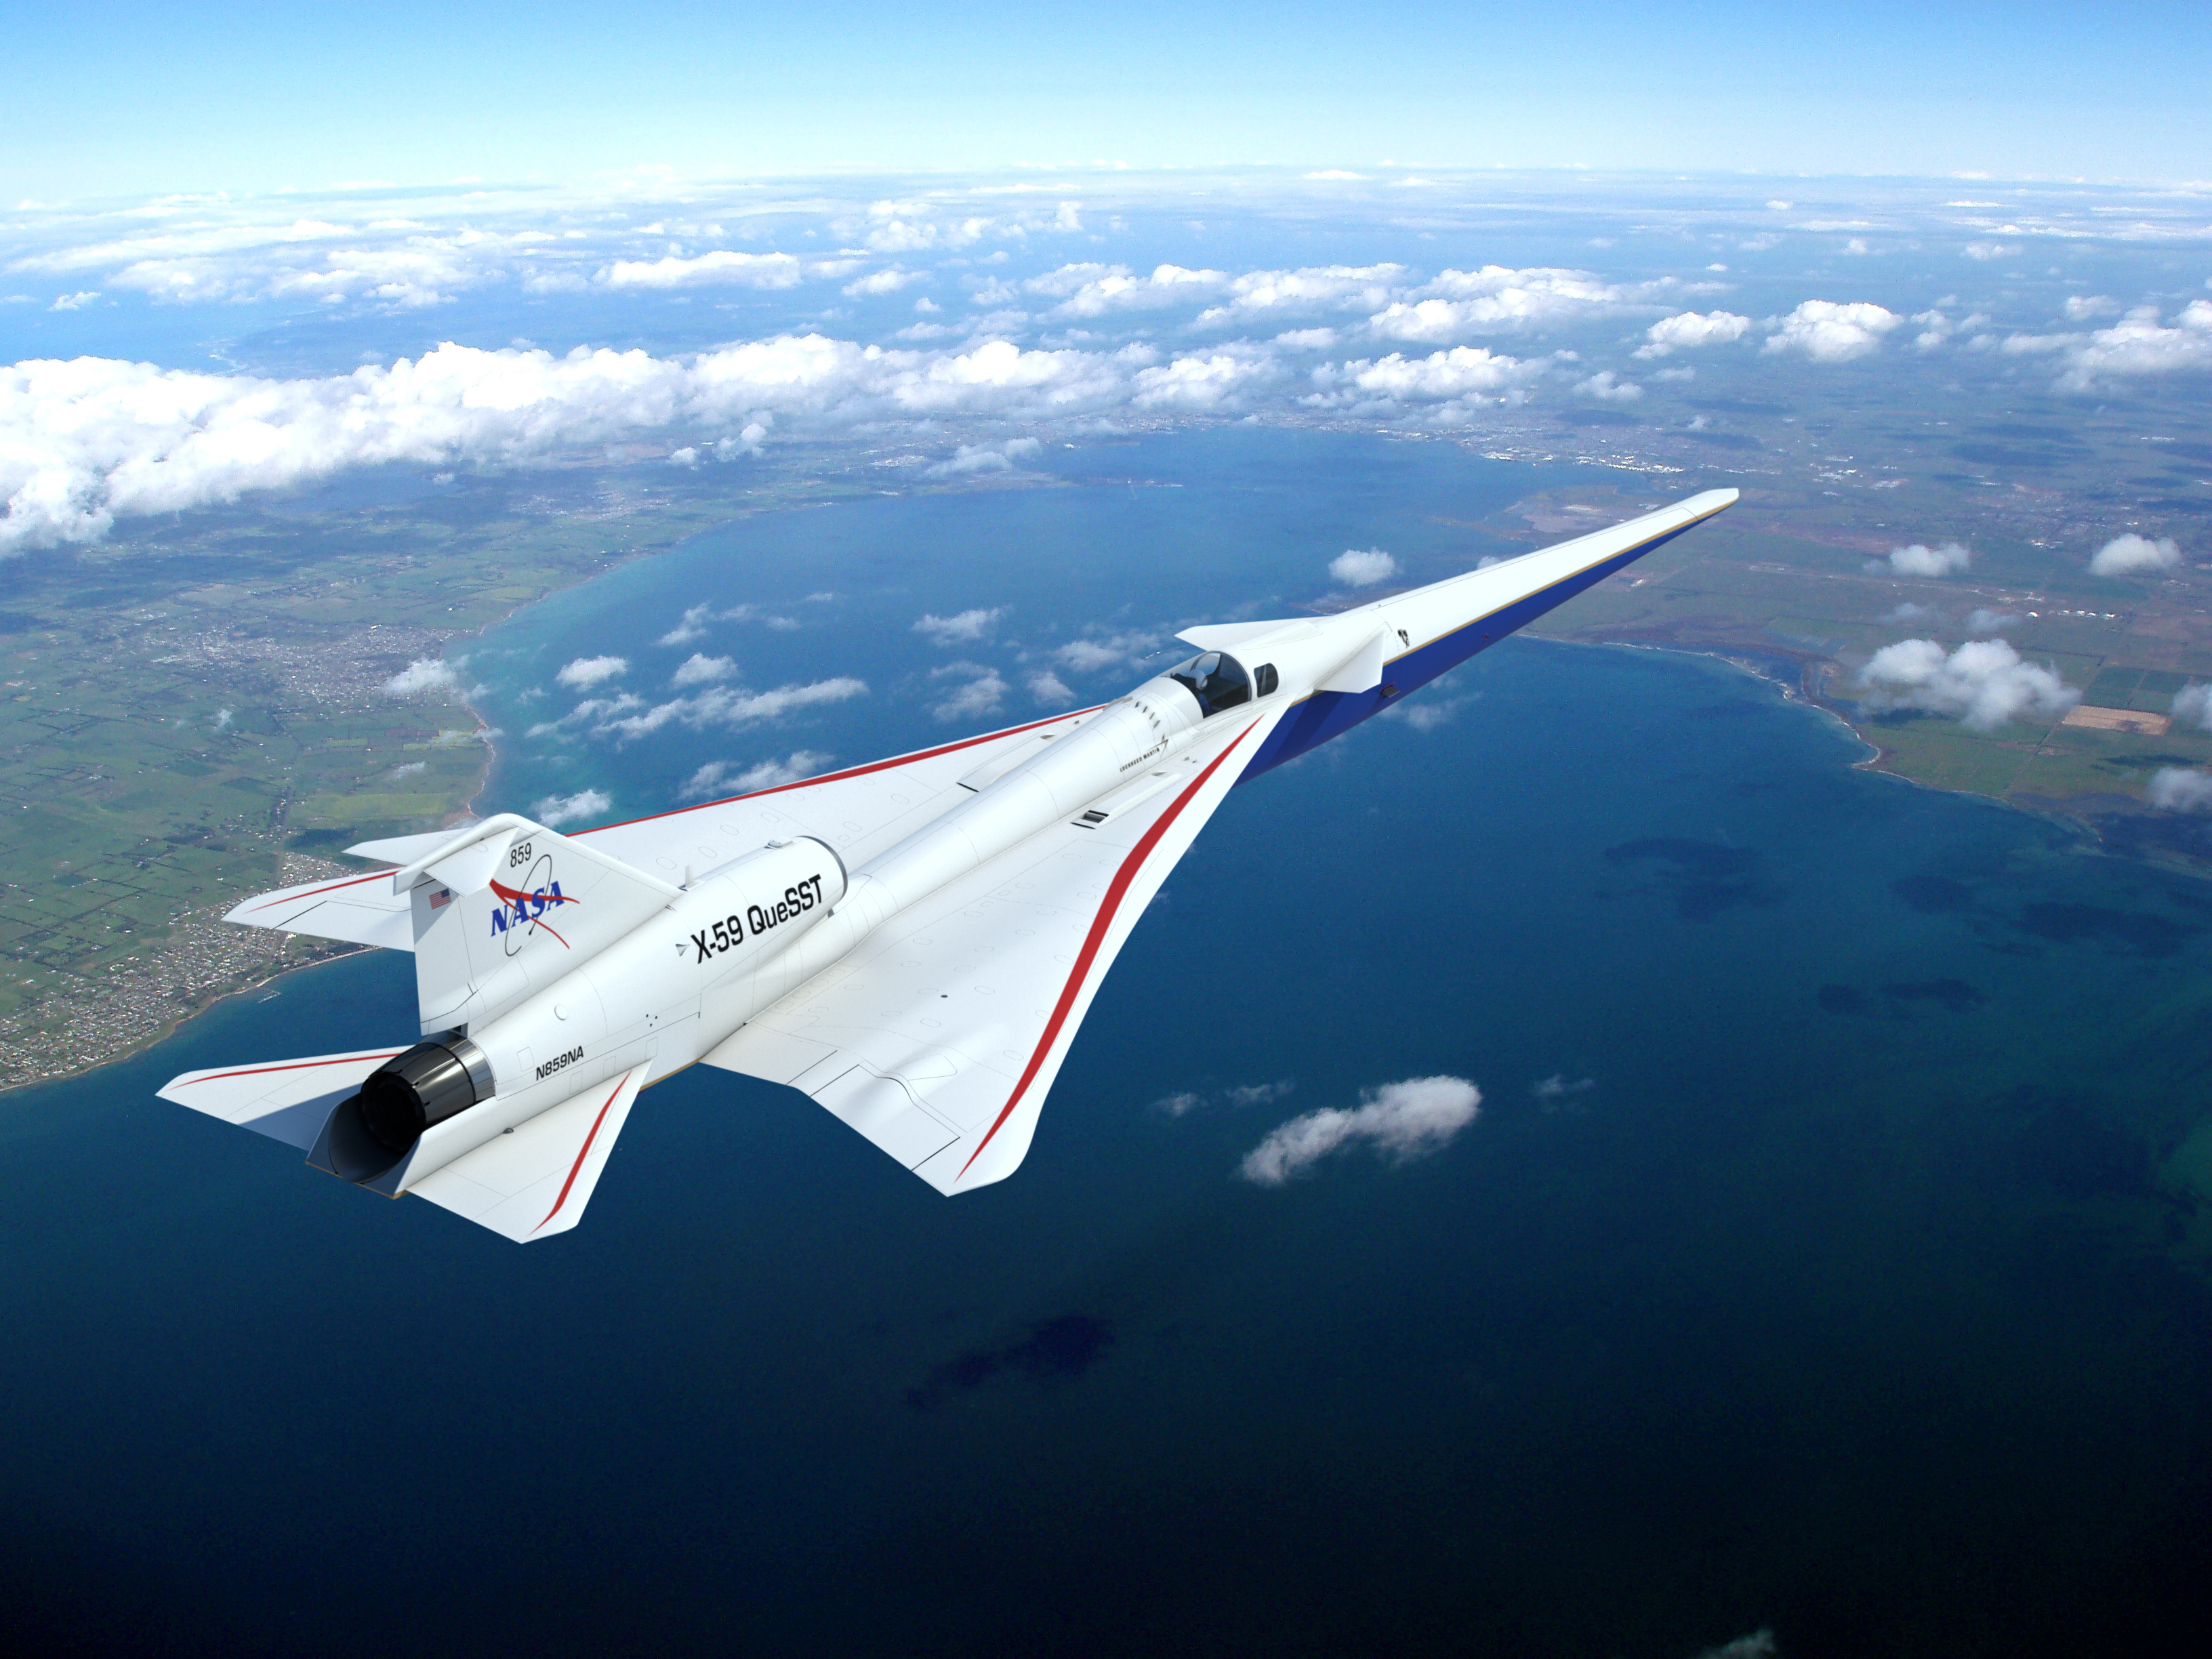 A composite image, which includes an illustration of NASA’s X-59 research aircraft